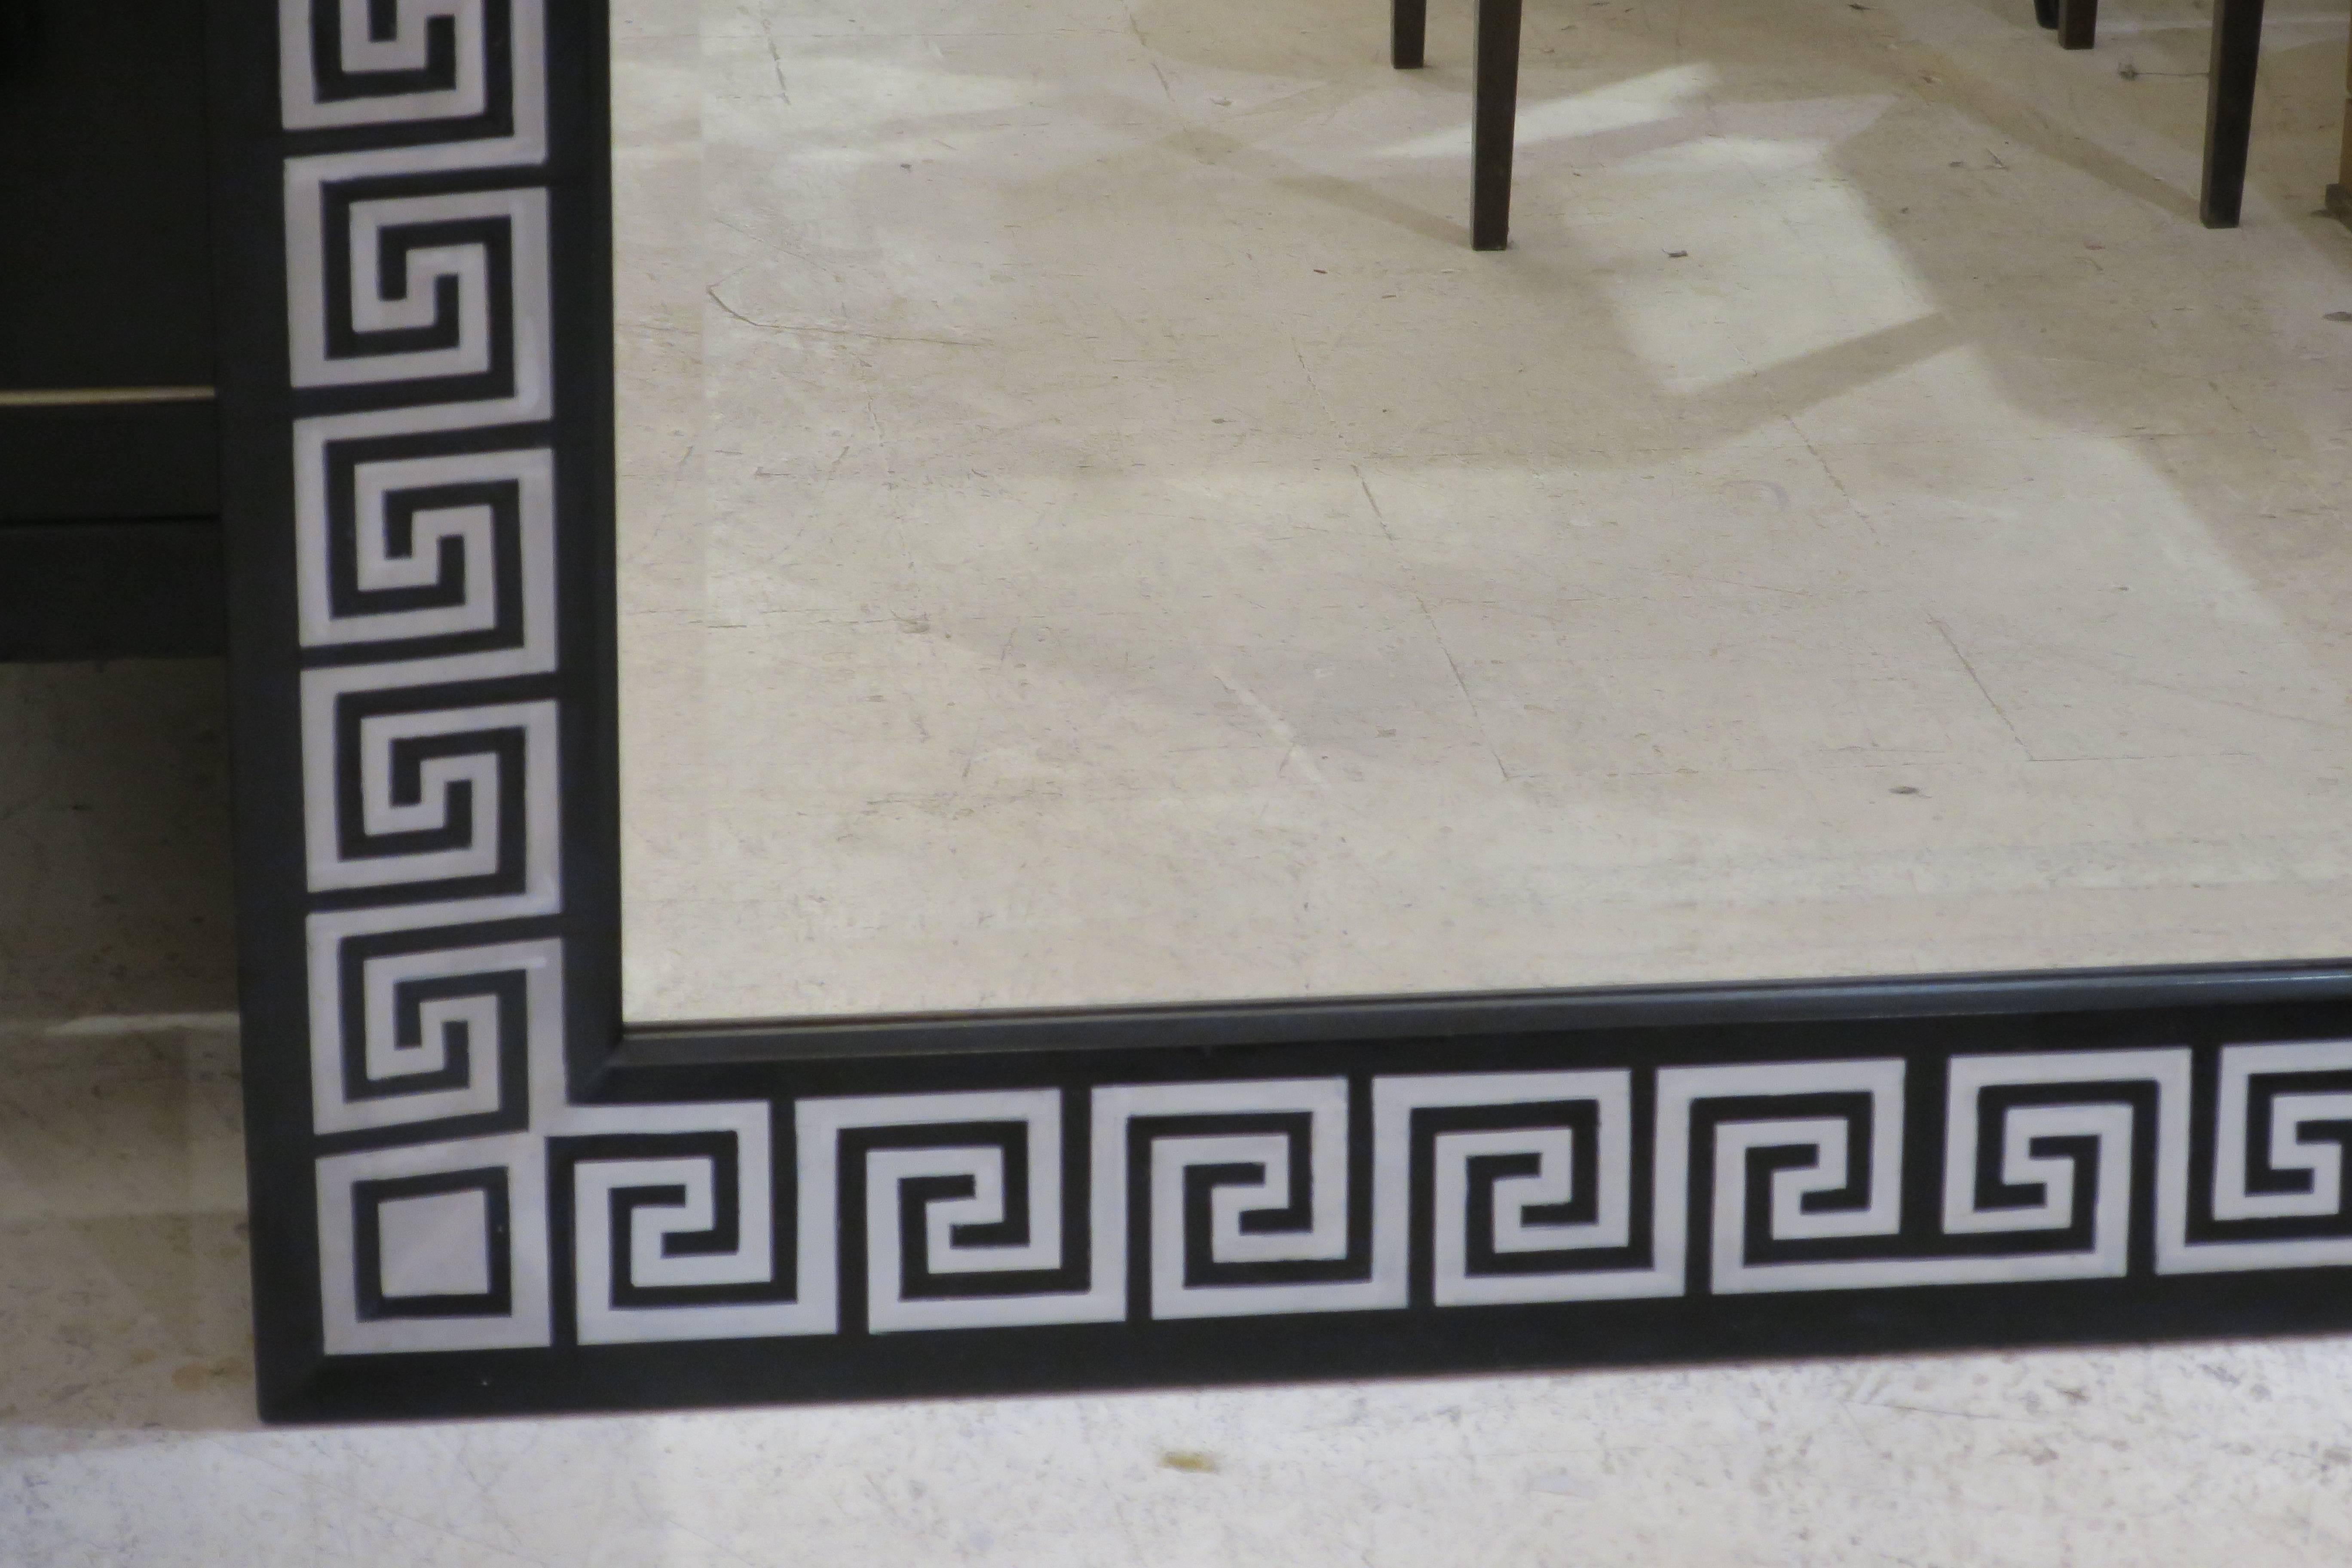 Hand-Crafted Bespoke Hand-Decorated Mirror with Greek Key Pattern Design